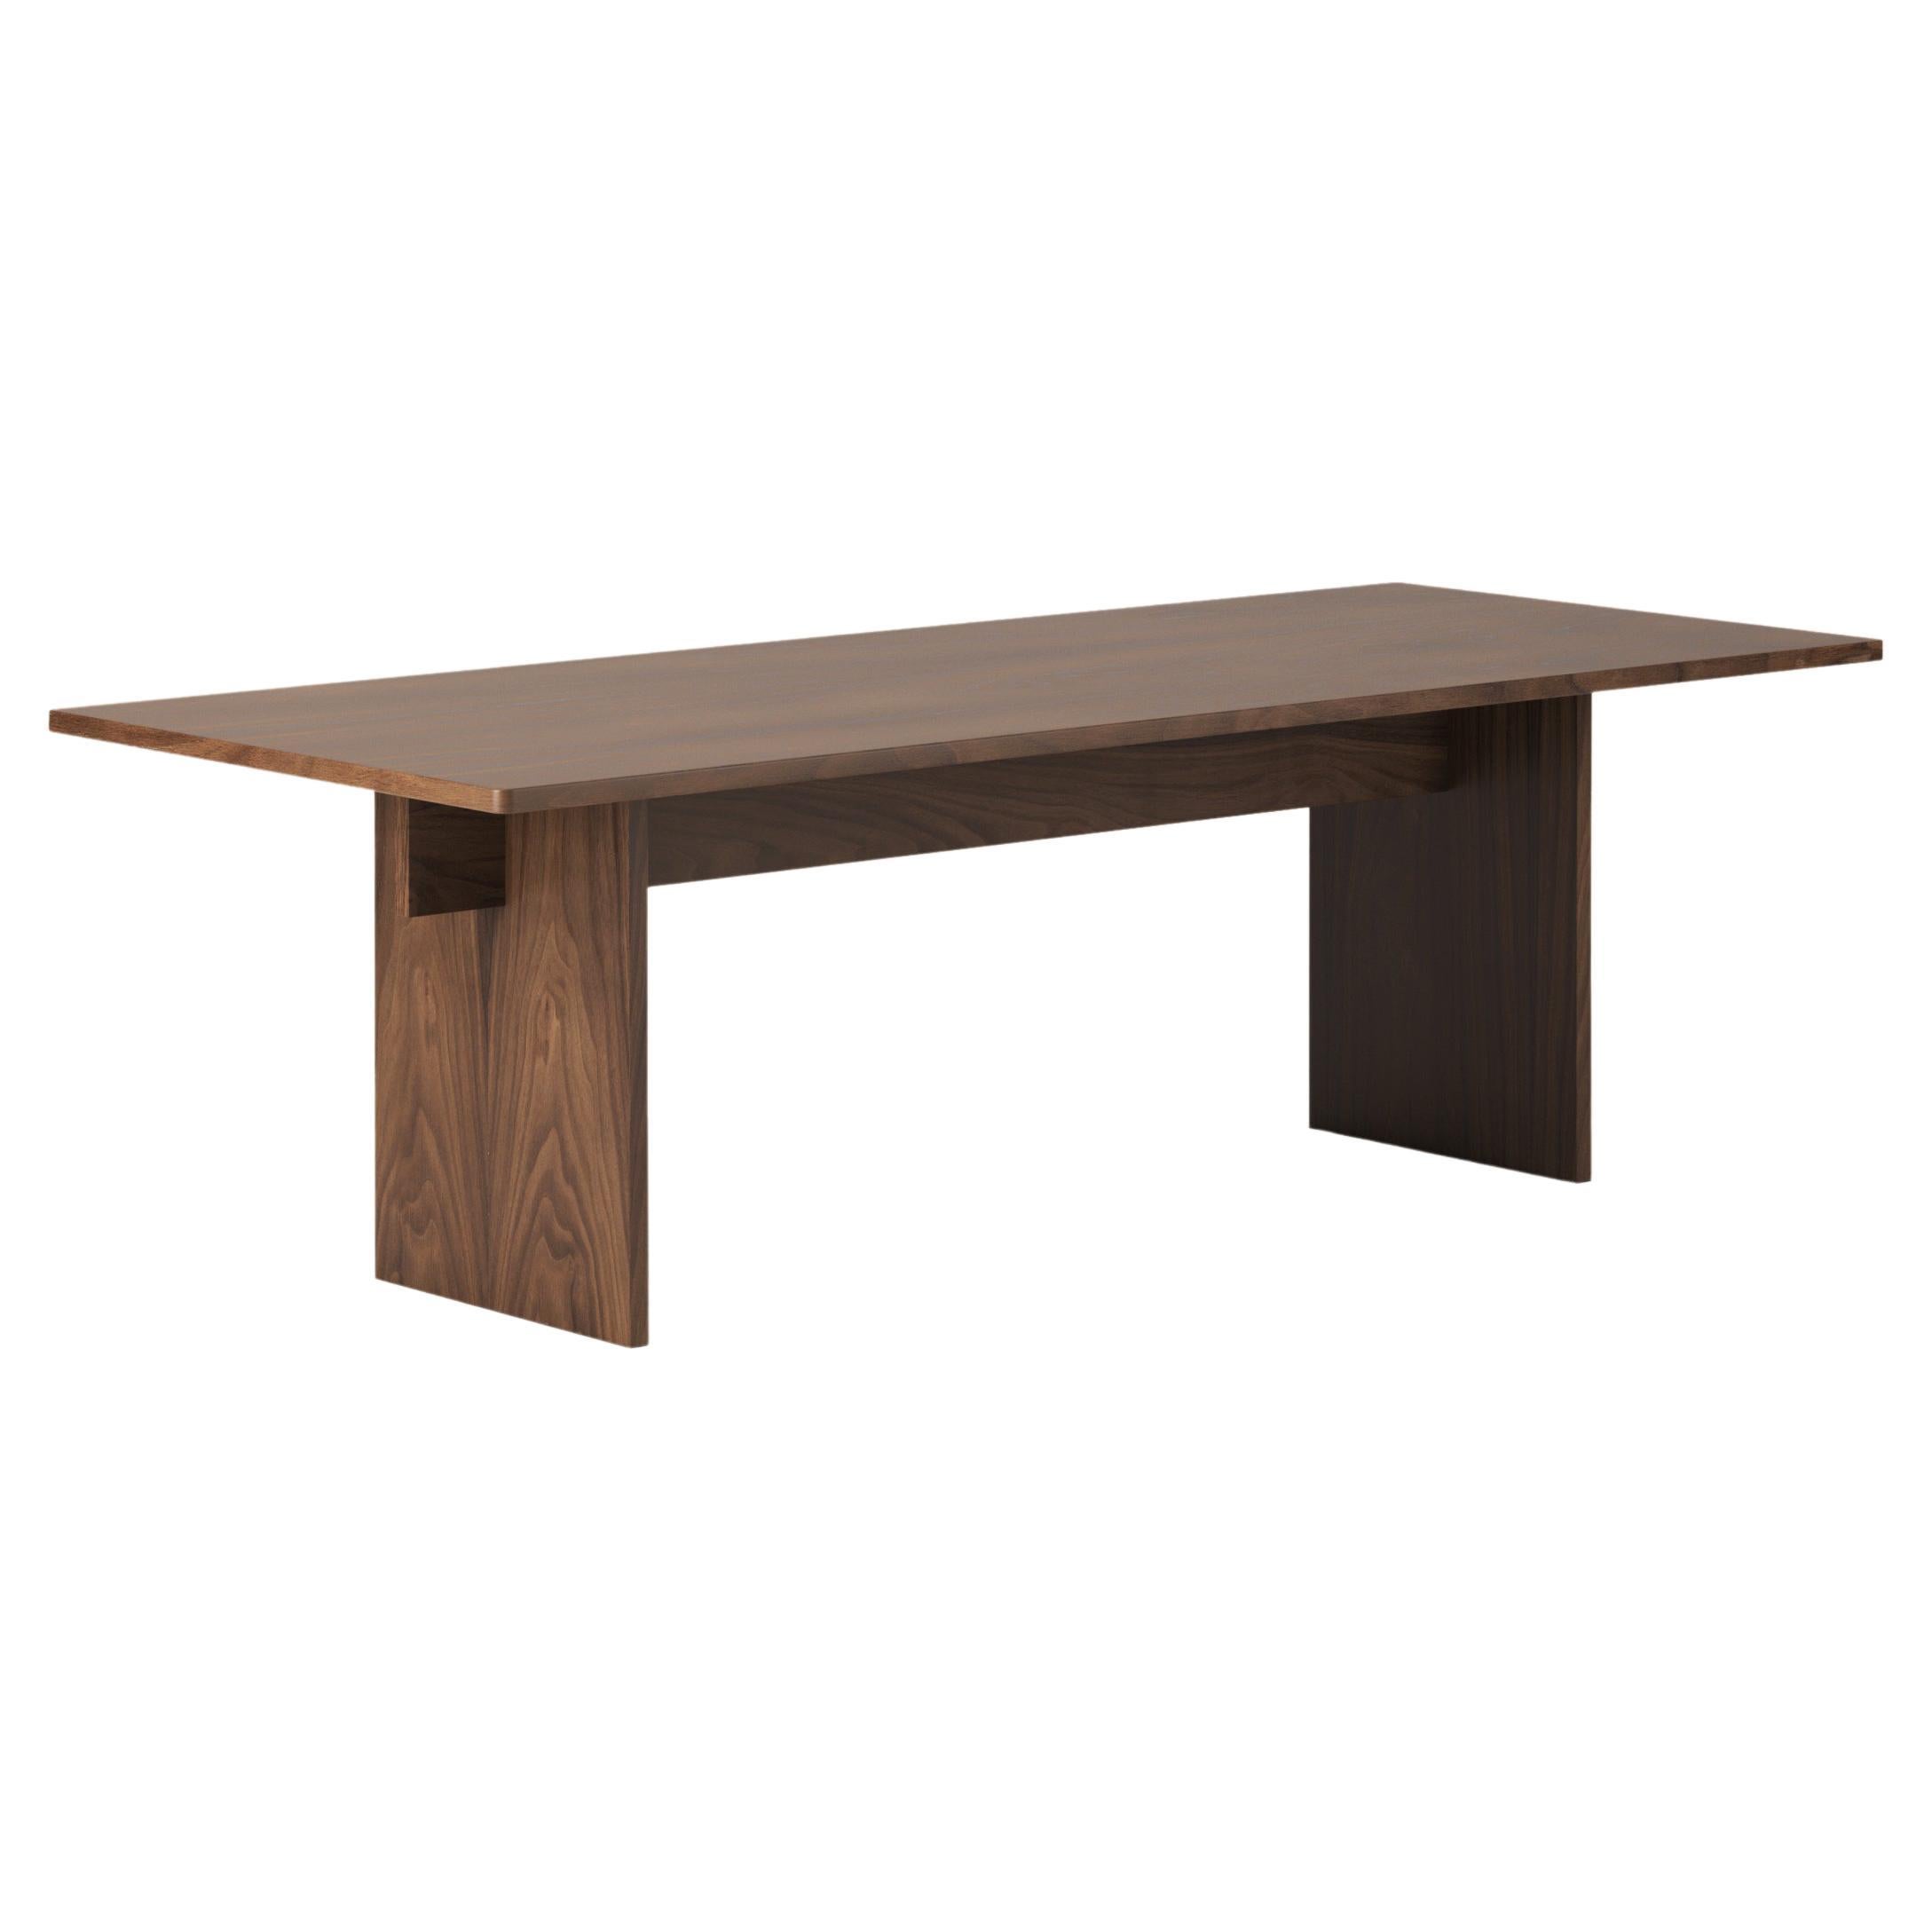 8 Seater  Faure Table Handcrafted in Walnut by Kevin Frankental for Lemon 